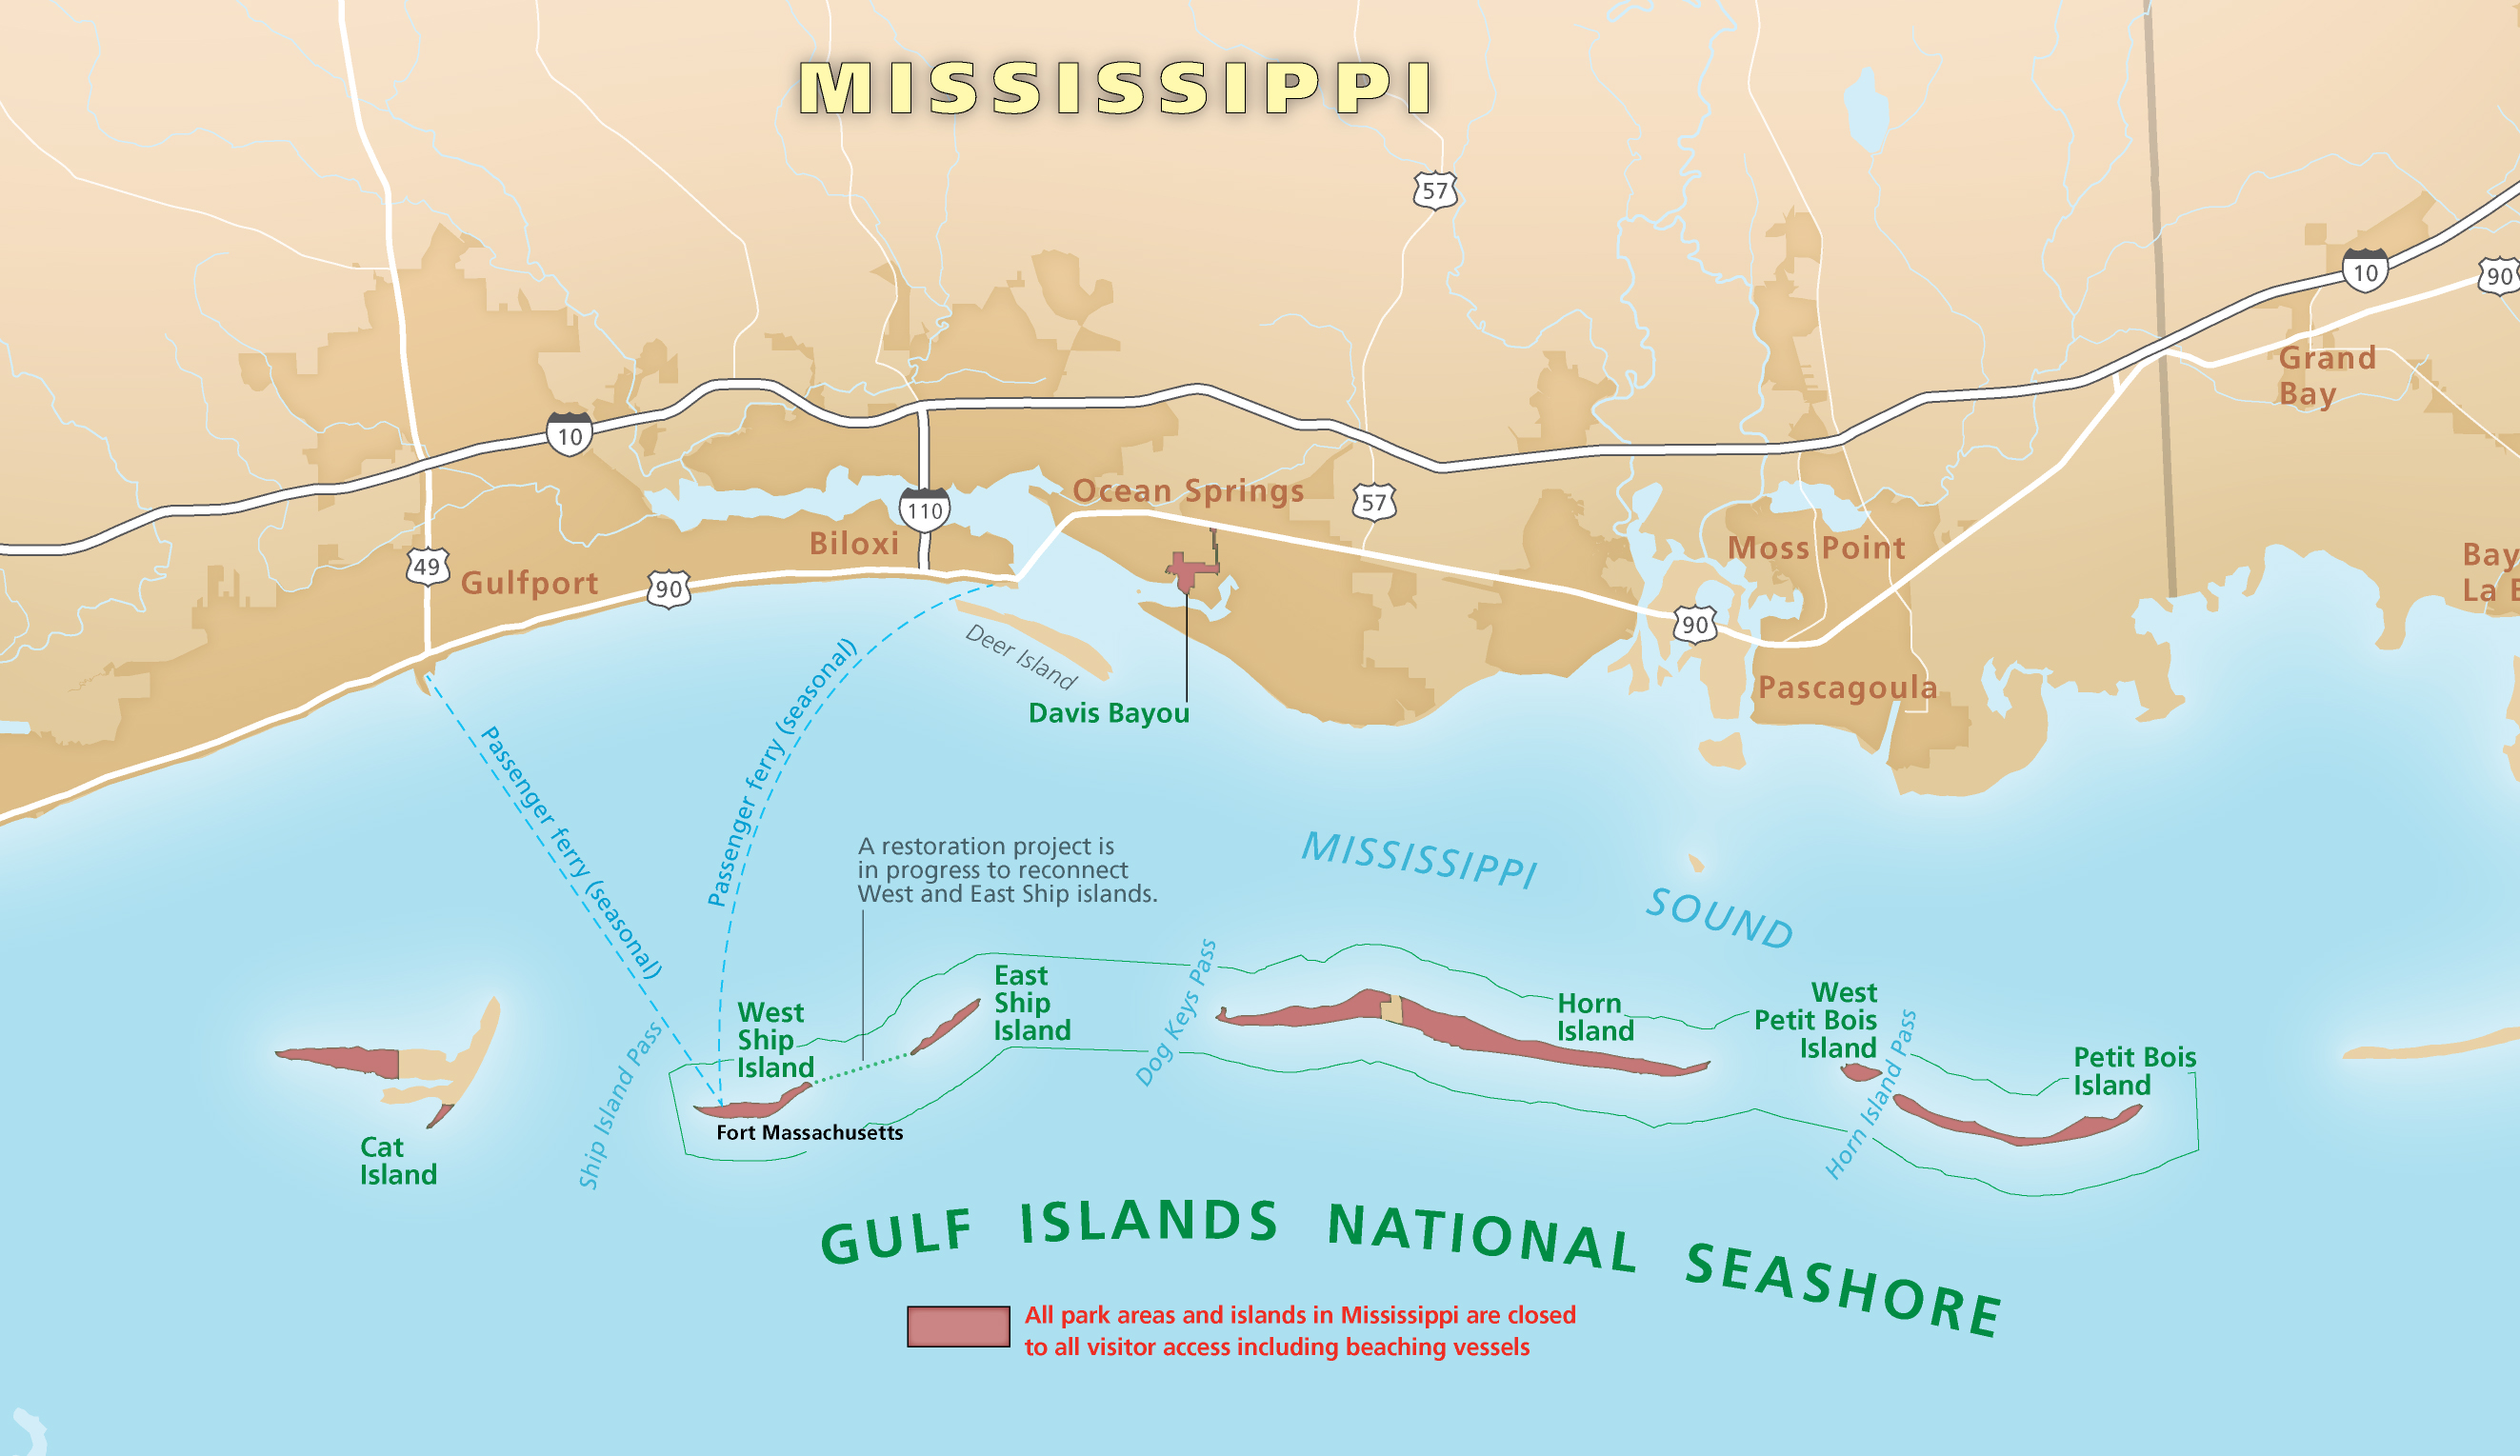 A map shows the coast of Misssissippi with several islands forming a chain. The islands are labeled from left to right Cat, West Ship, East Ship, Horn, West Petit Bois, Petit Bois. All are colored red which stands for closed.